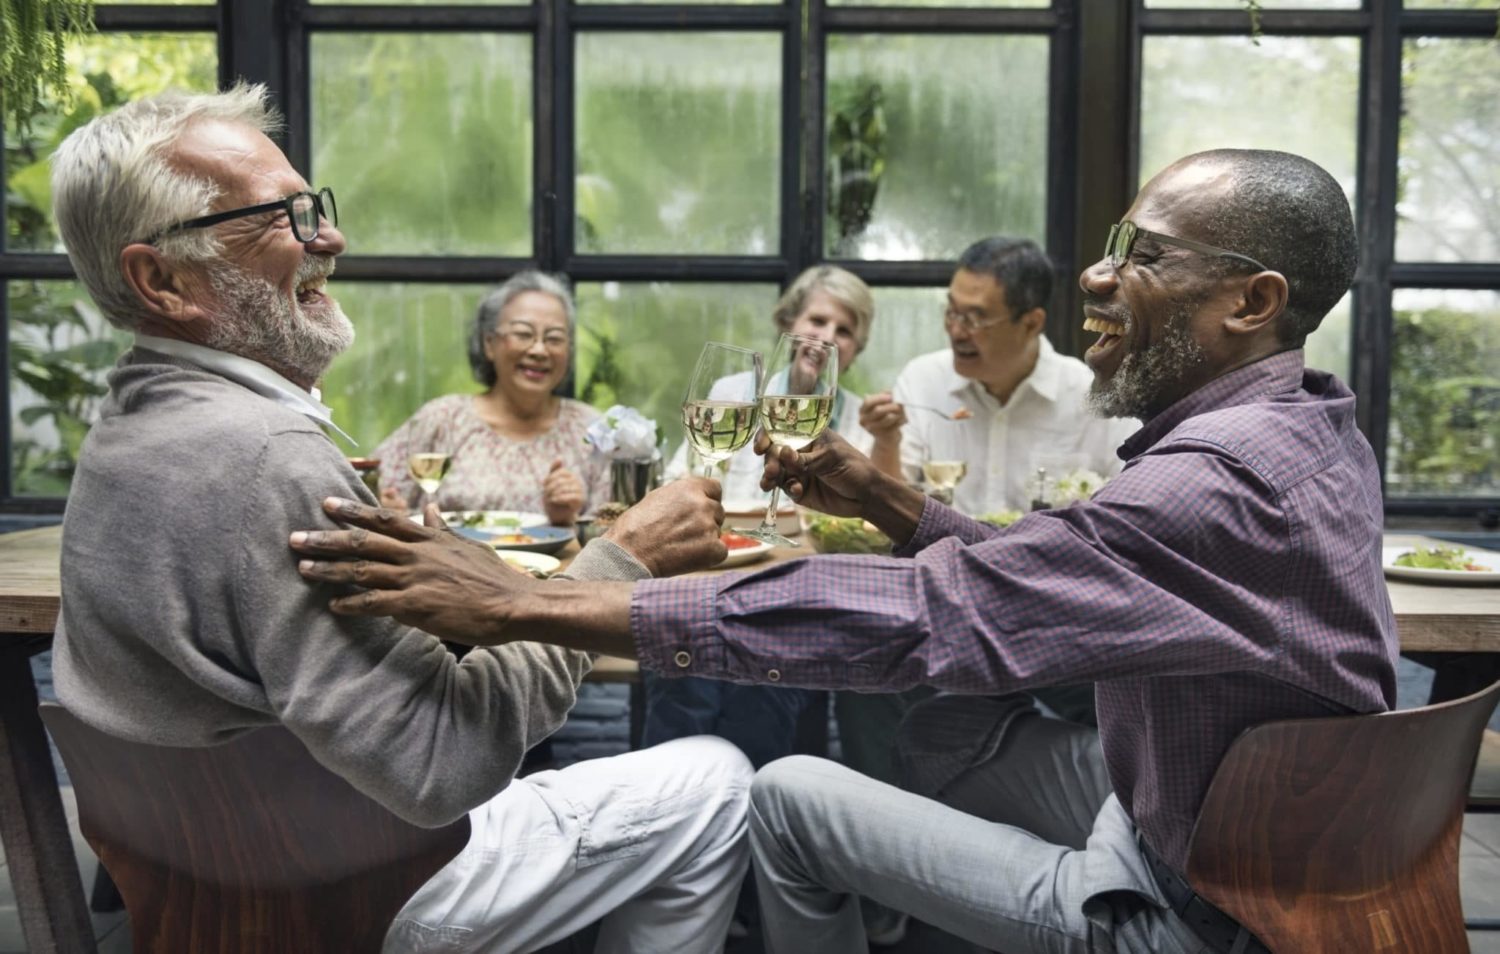 A group of elderly friends toasting a glass of wine as they gather for dinner in Cincinnati, OH.